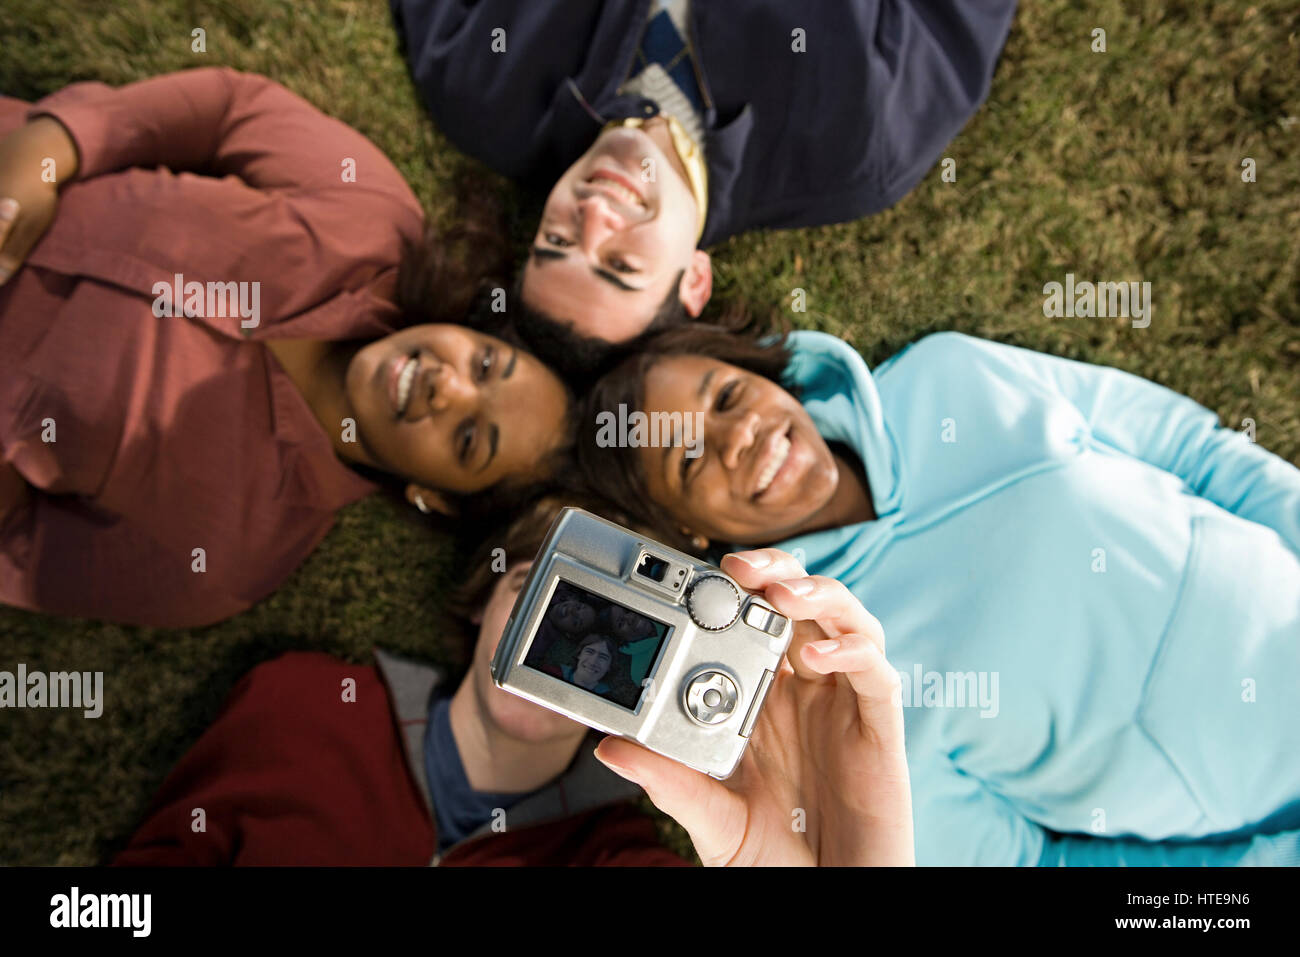 Four students taking a photograph outdoors Stock Photo